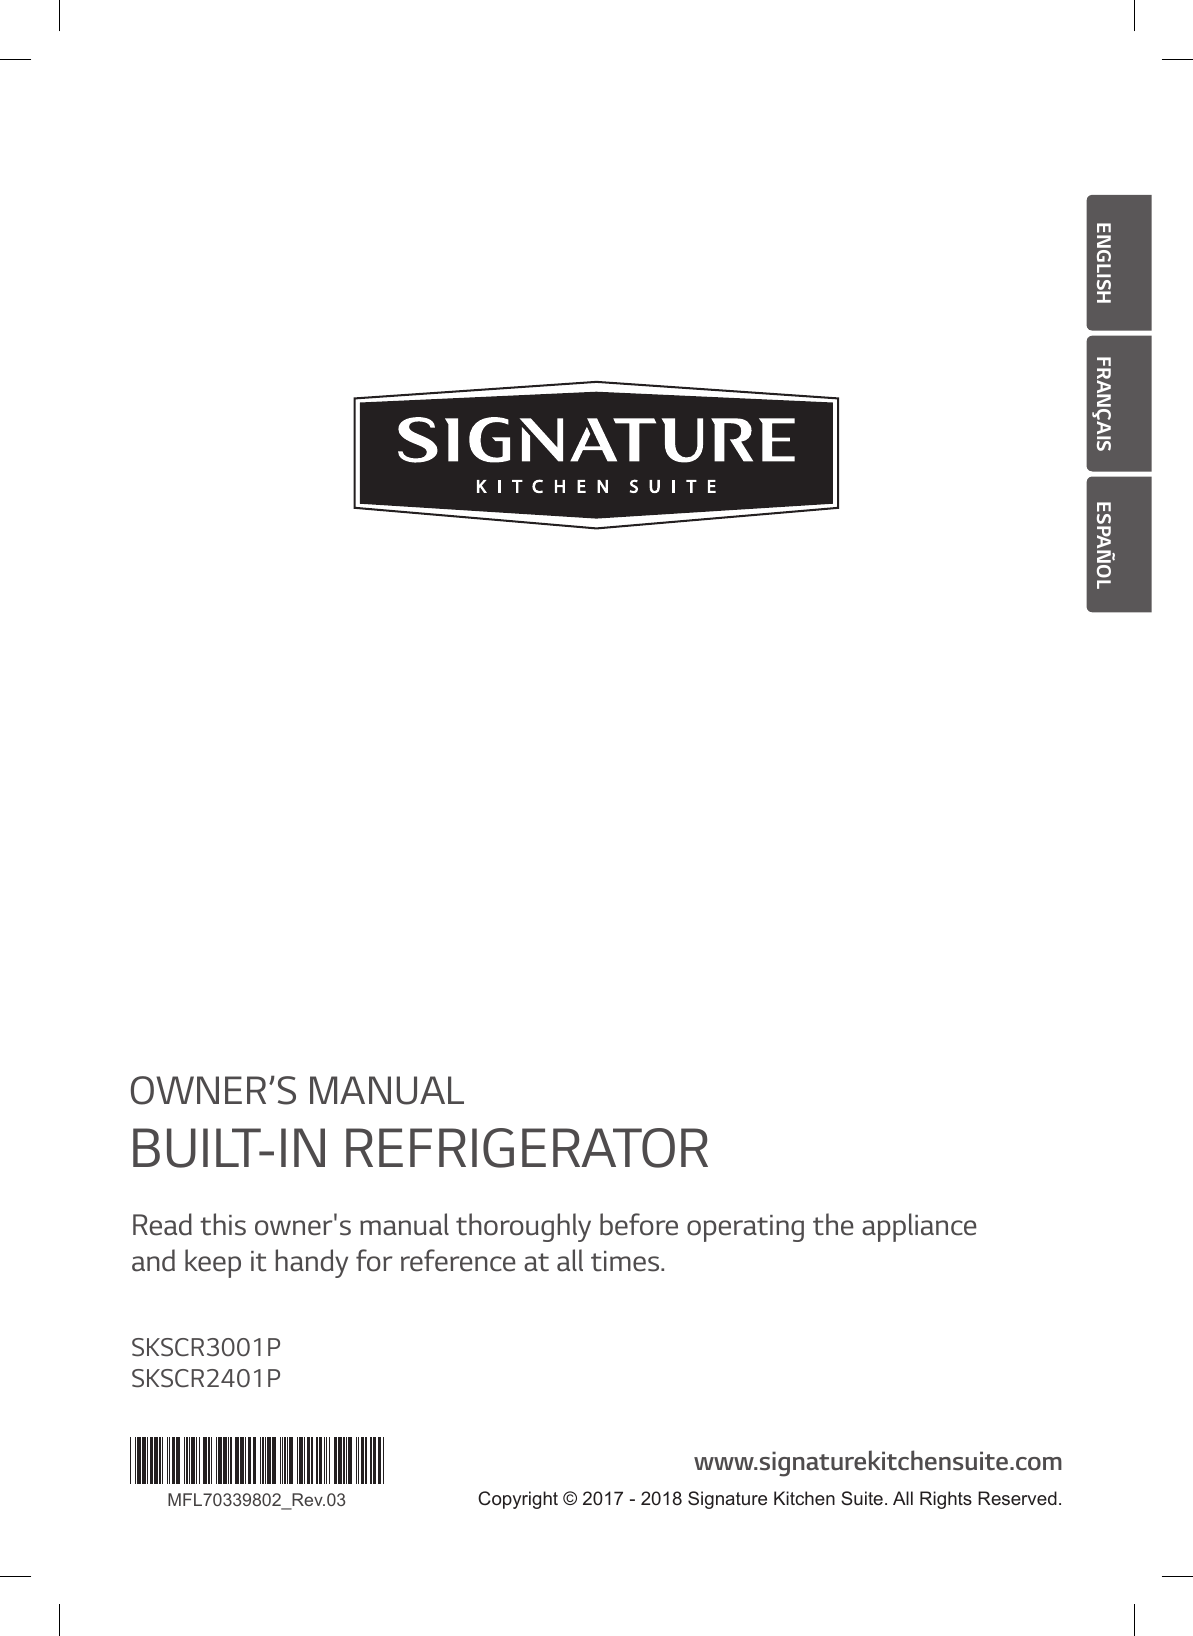 ENGLISH FRANÇAIS ESPAÑOLMFL70339802_Rev.03OWNER’S MANUALBUILT-IN REFRIGERATORRead this owner&apos;s manual thoroughly before operating the appliance  and keep it handy for reference at all times.www.signaturekitchensuite.comSKSCR3001PSKSCR2401PCopyright © 2017 - 2018 Signature Kitchen Suite. All Rights Reserved.